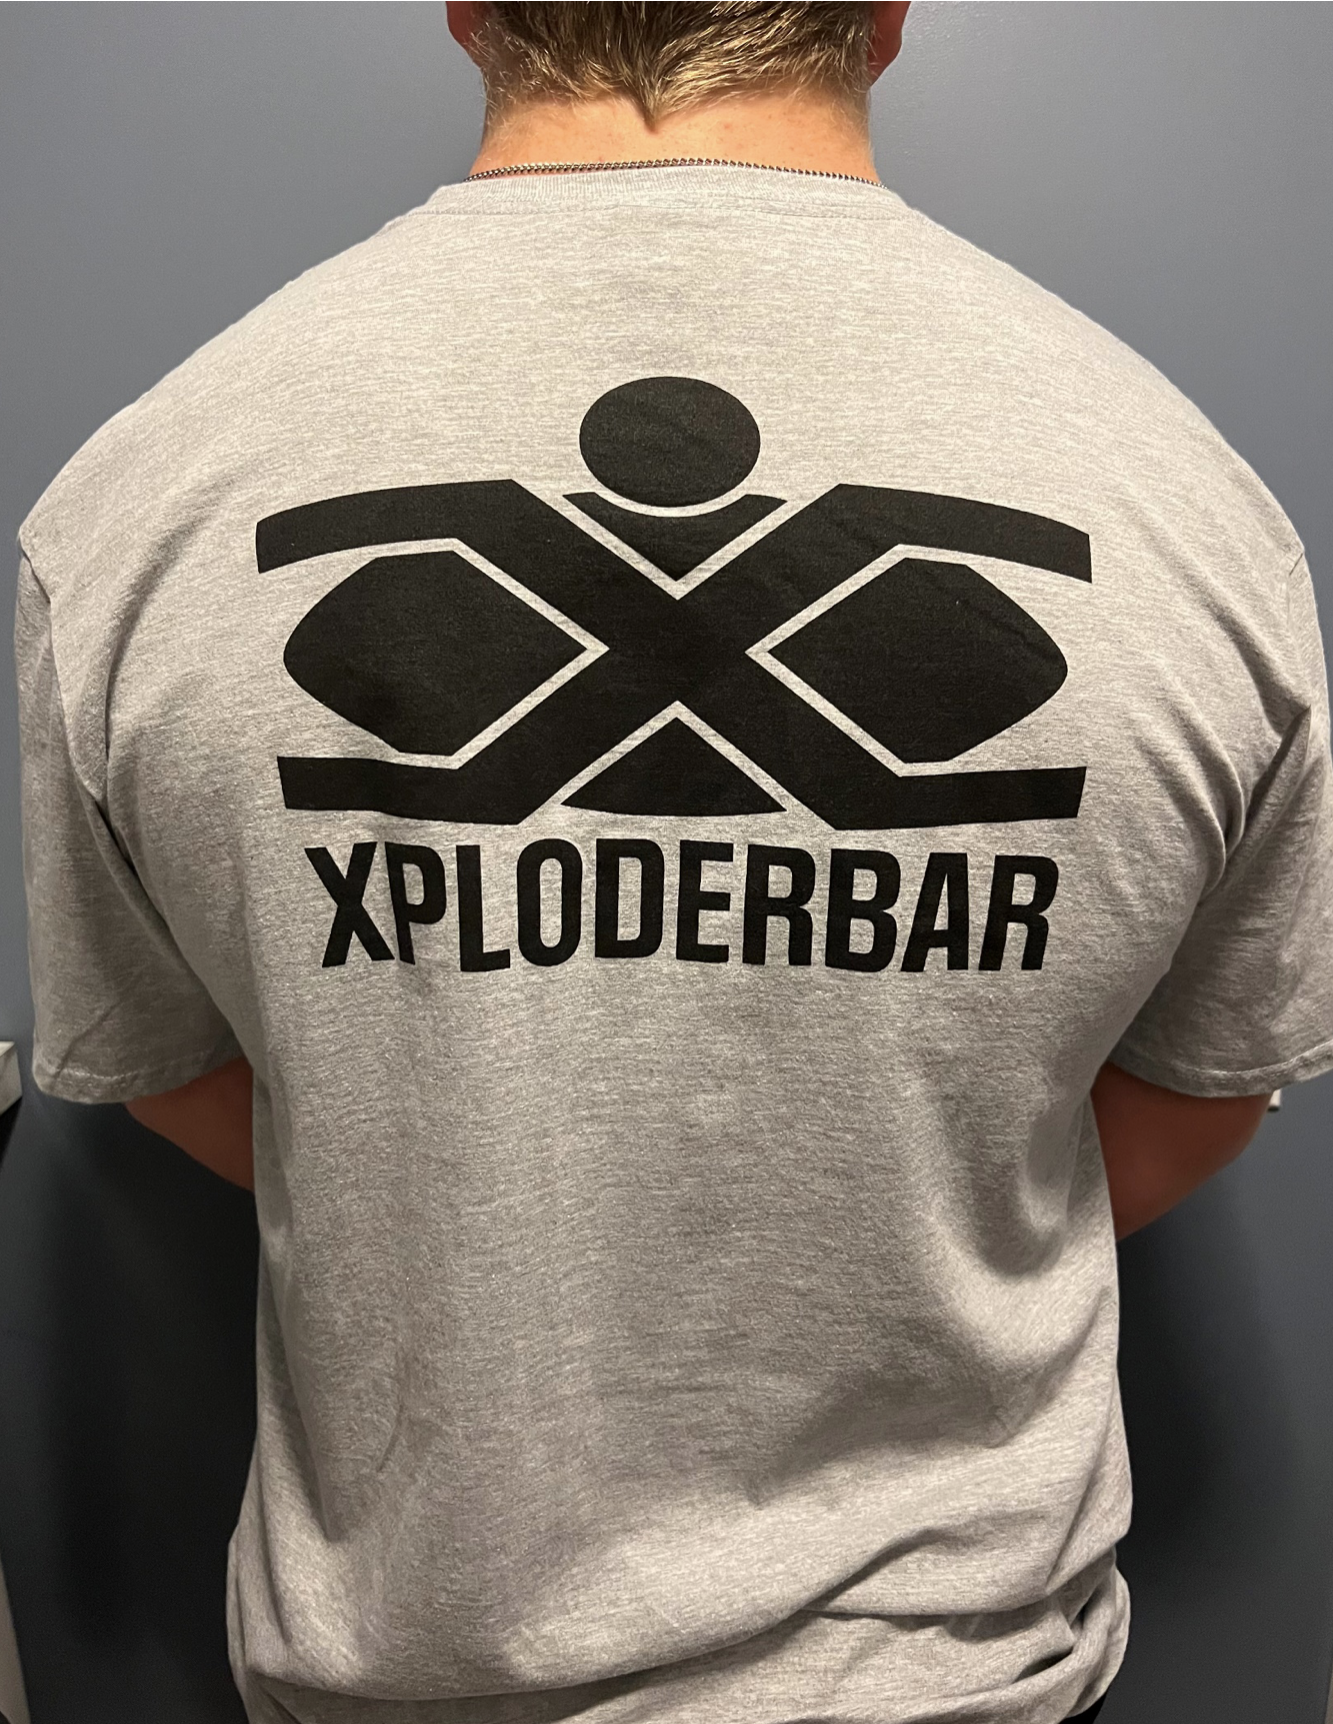 A man is wearing a grey t-shirt that says xploderbar on the back